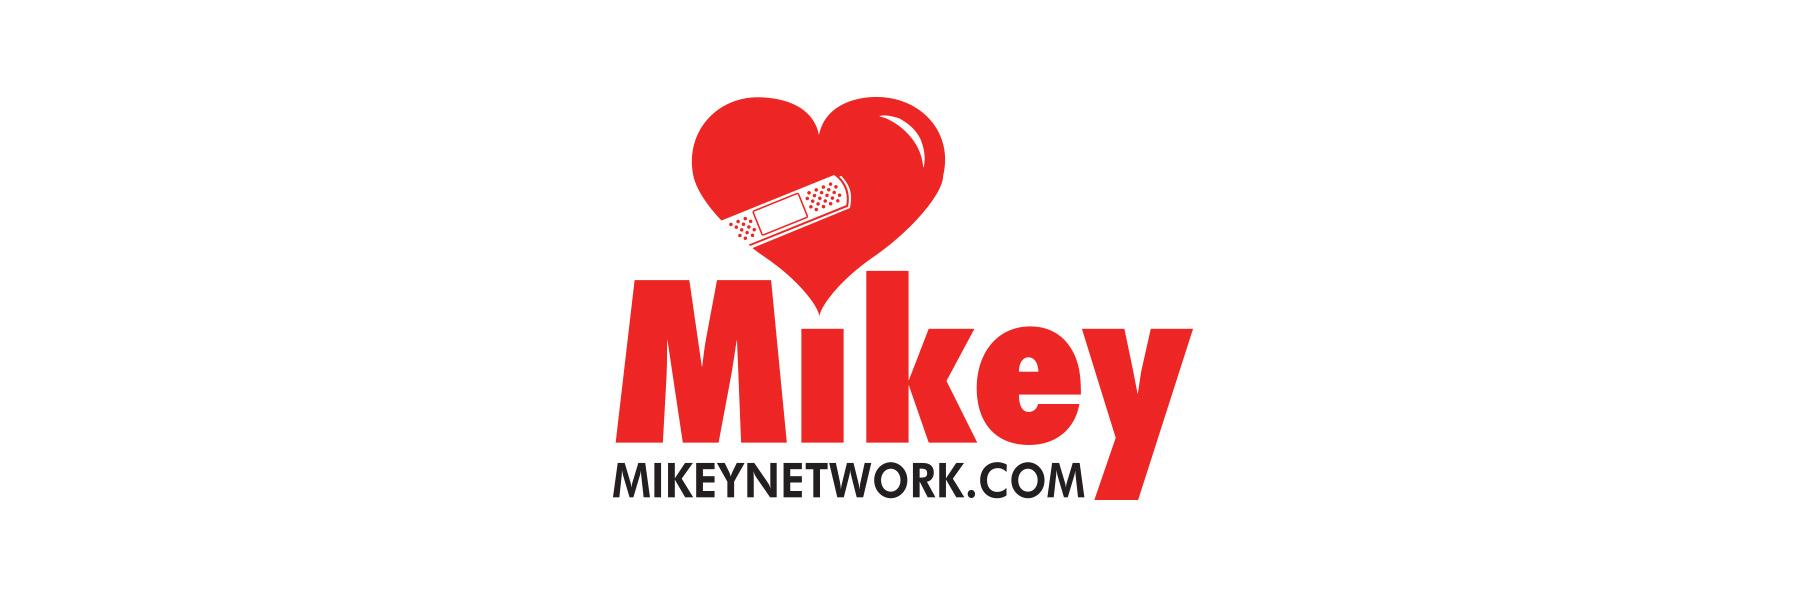 The Mikey Network